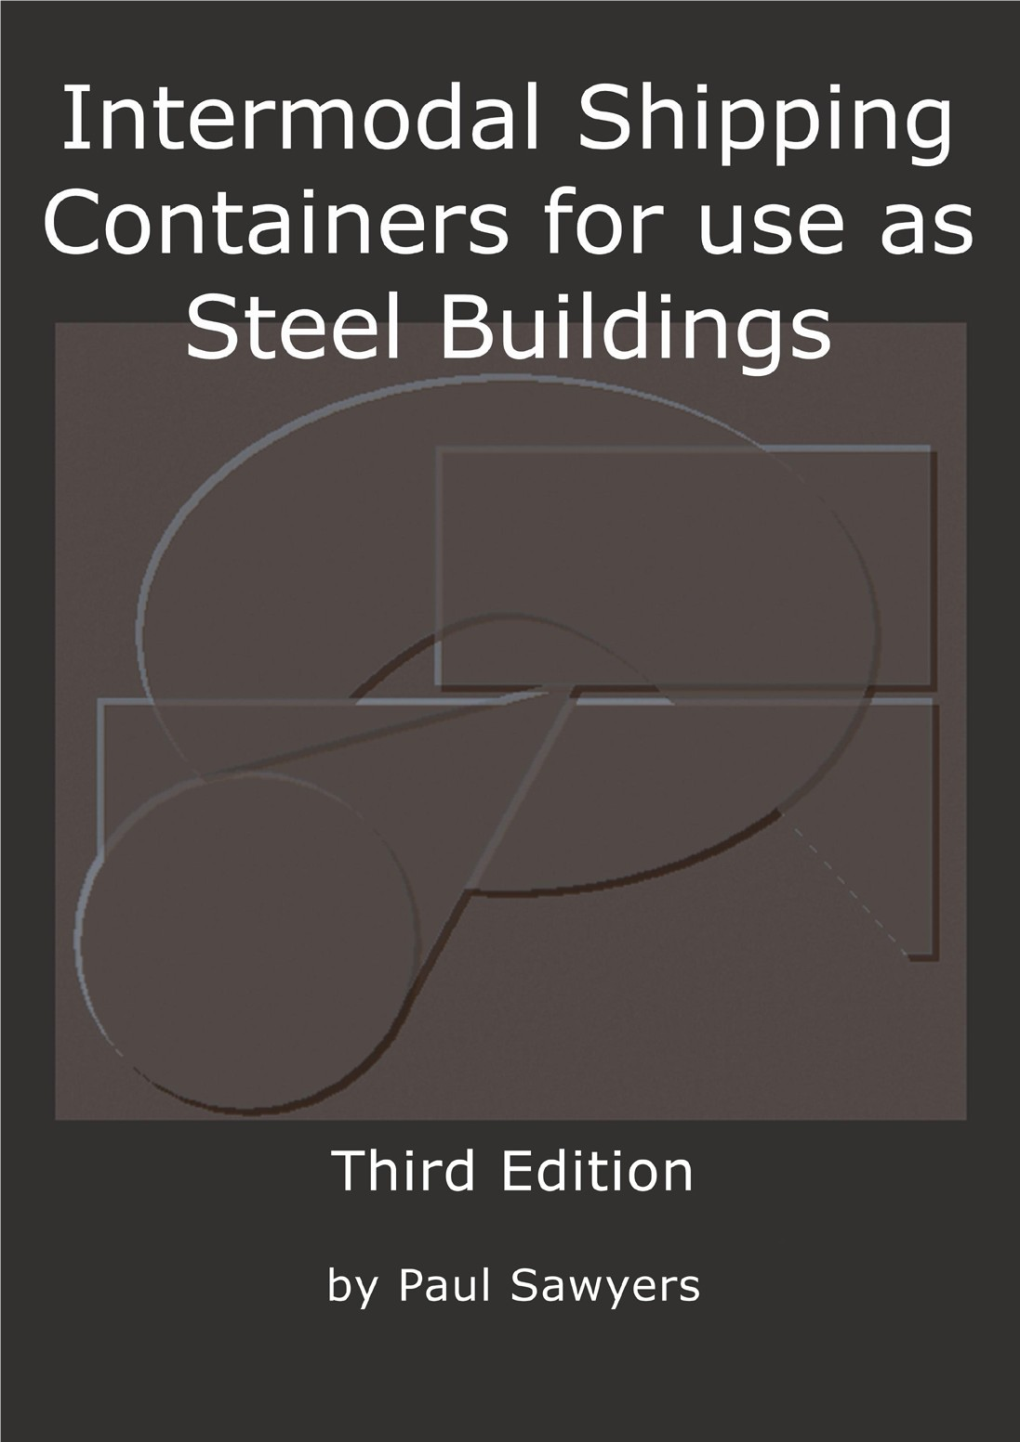 Intermodal Shipping Containers for Use As Steel Buildings (Third Edition)